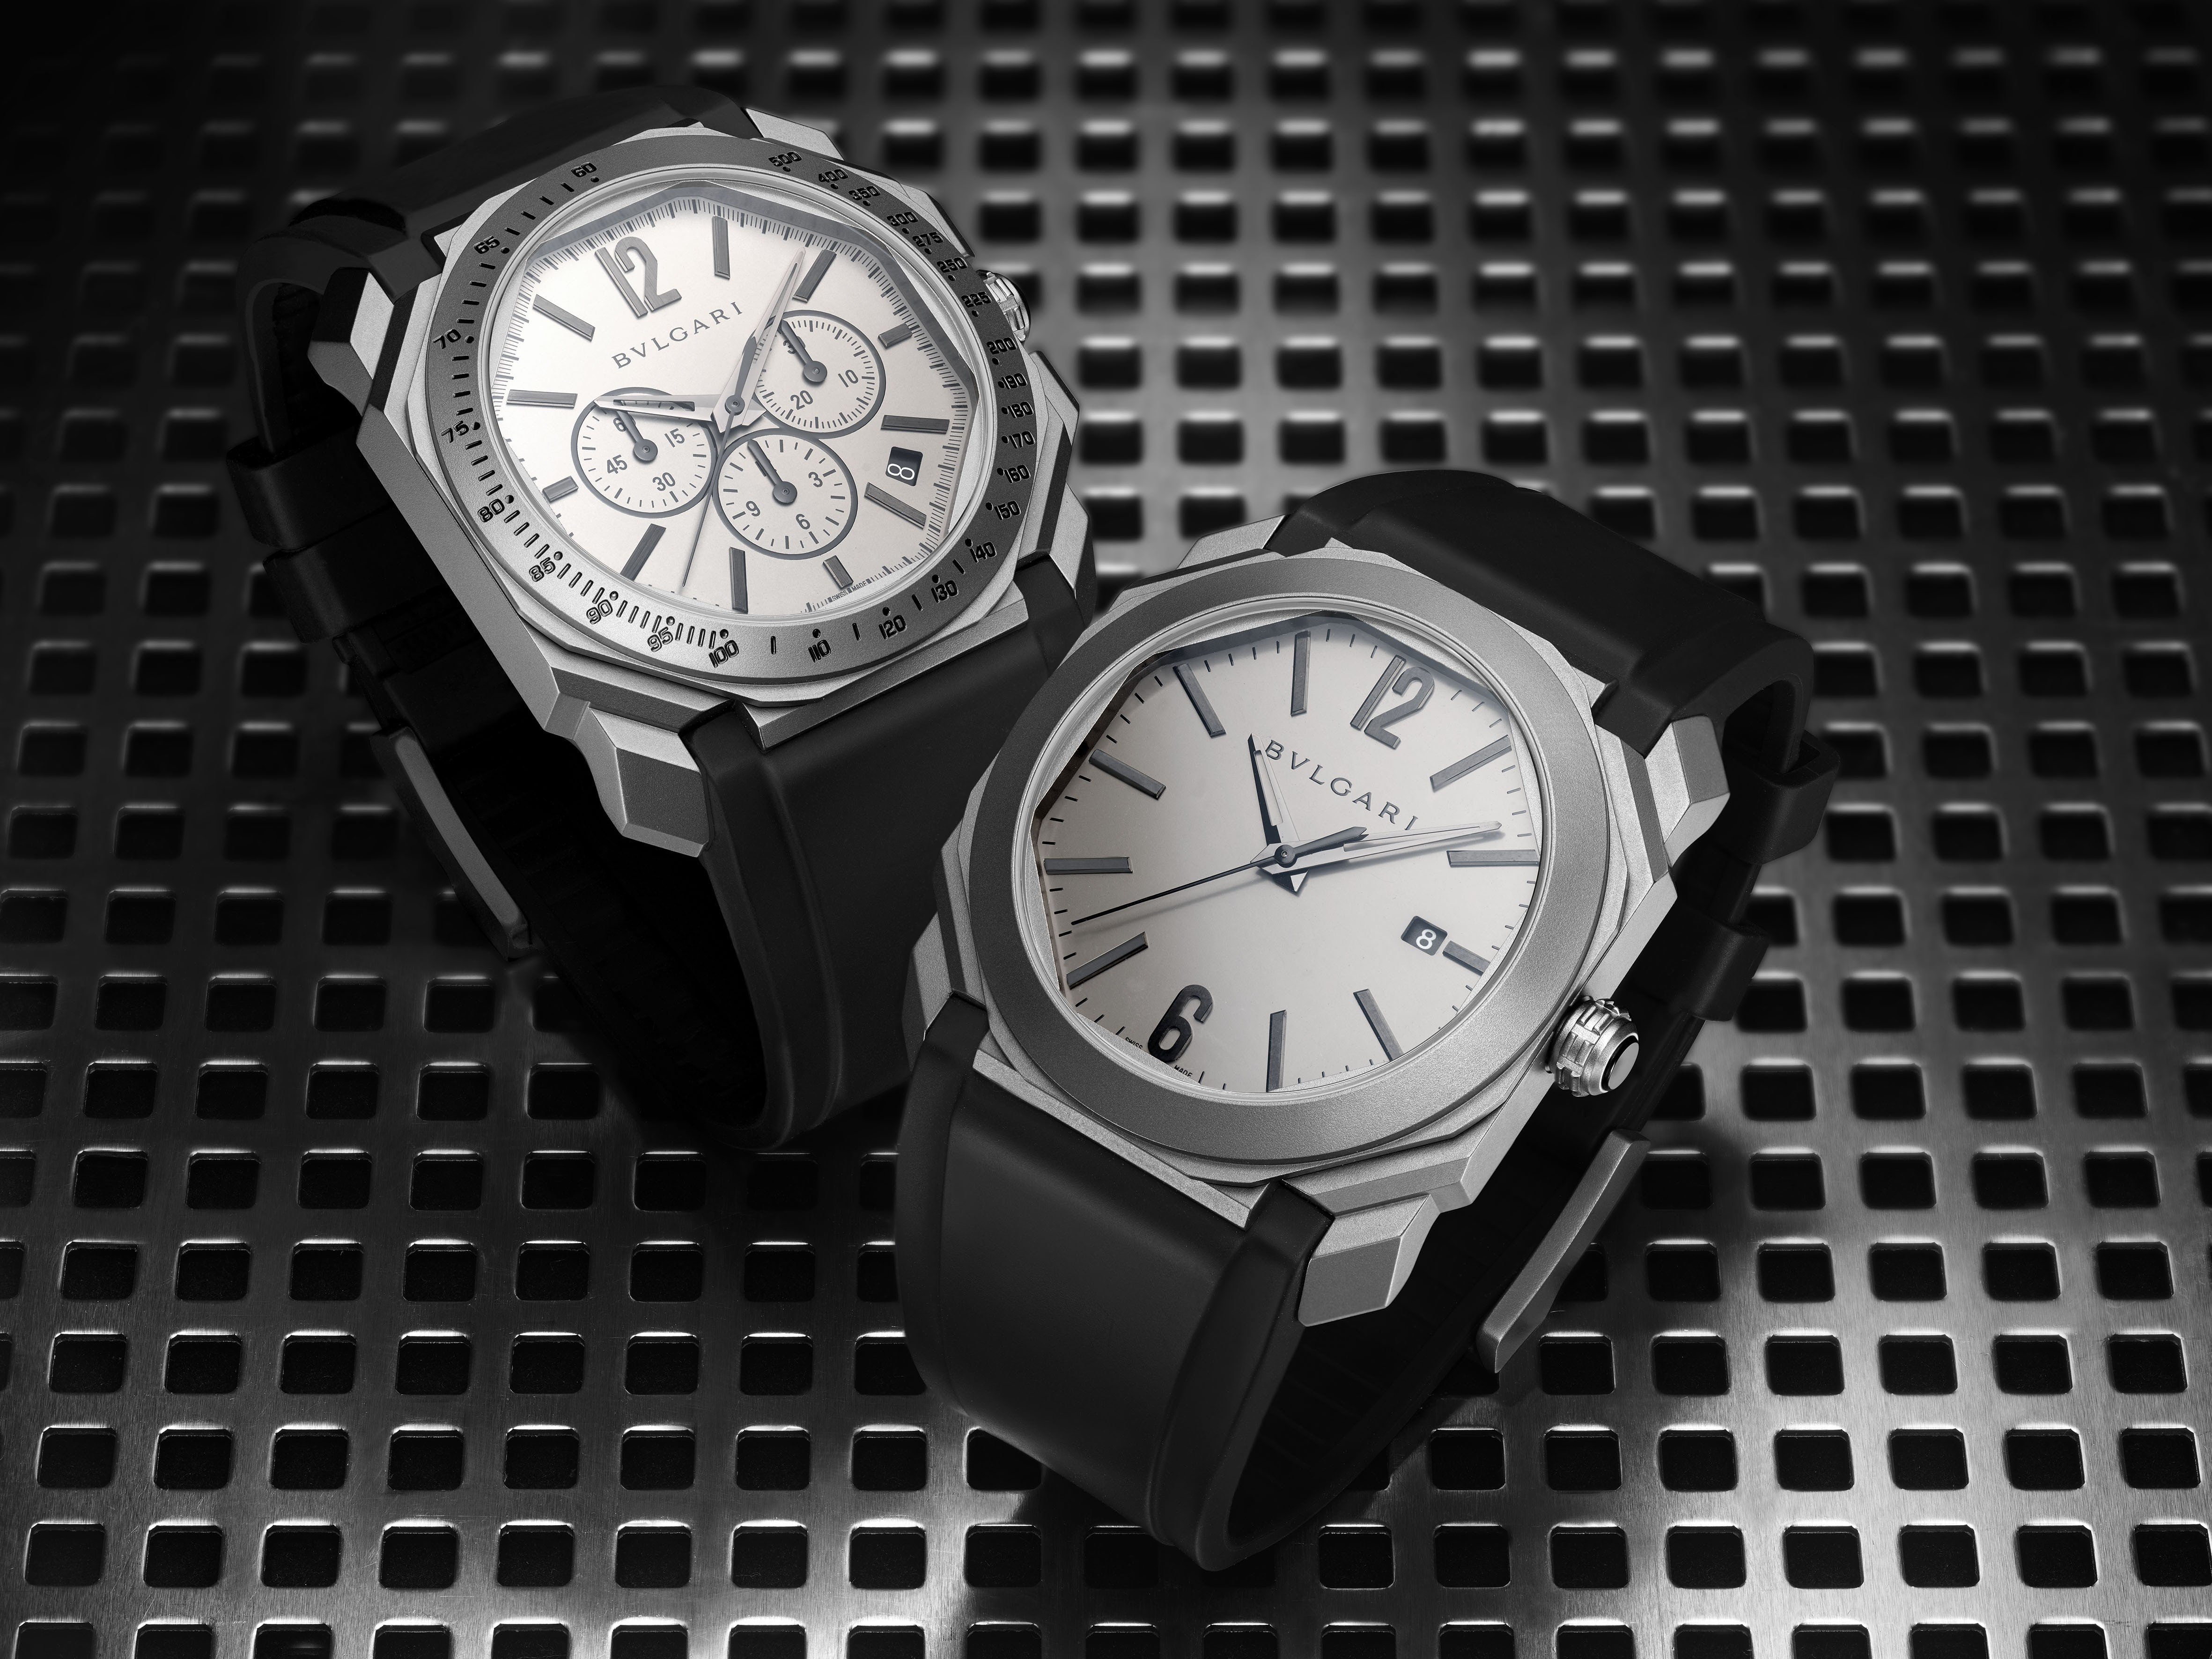 Bulgari’s Octo L’Originale Chronograph (left) and three-hand Octo L'Originale in titanium are among the innovative designs featured at this year’s Baselworld 2018 from March 22 to 27 in Switzerland, 